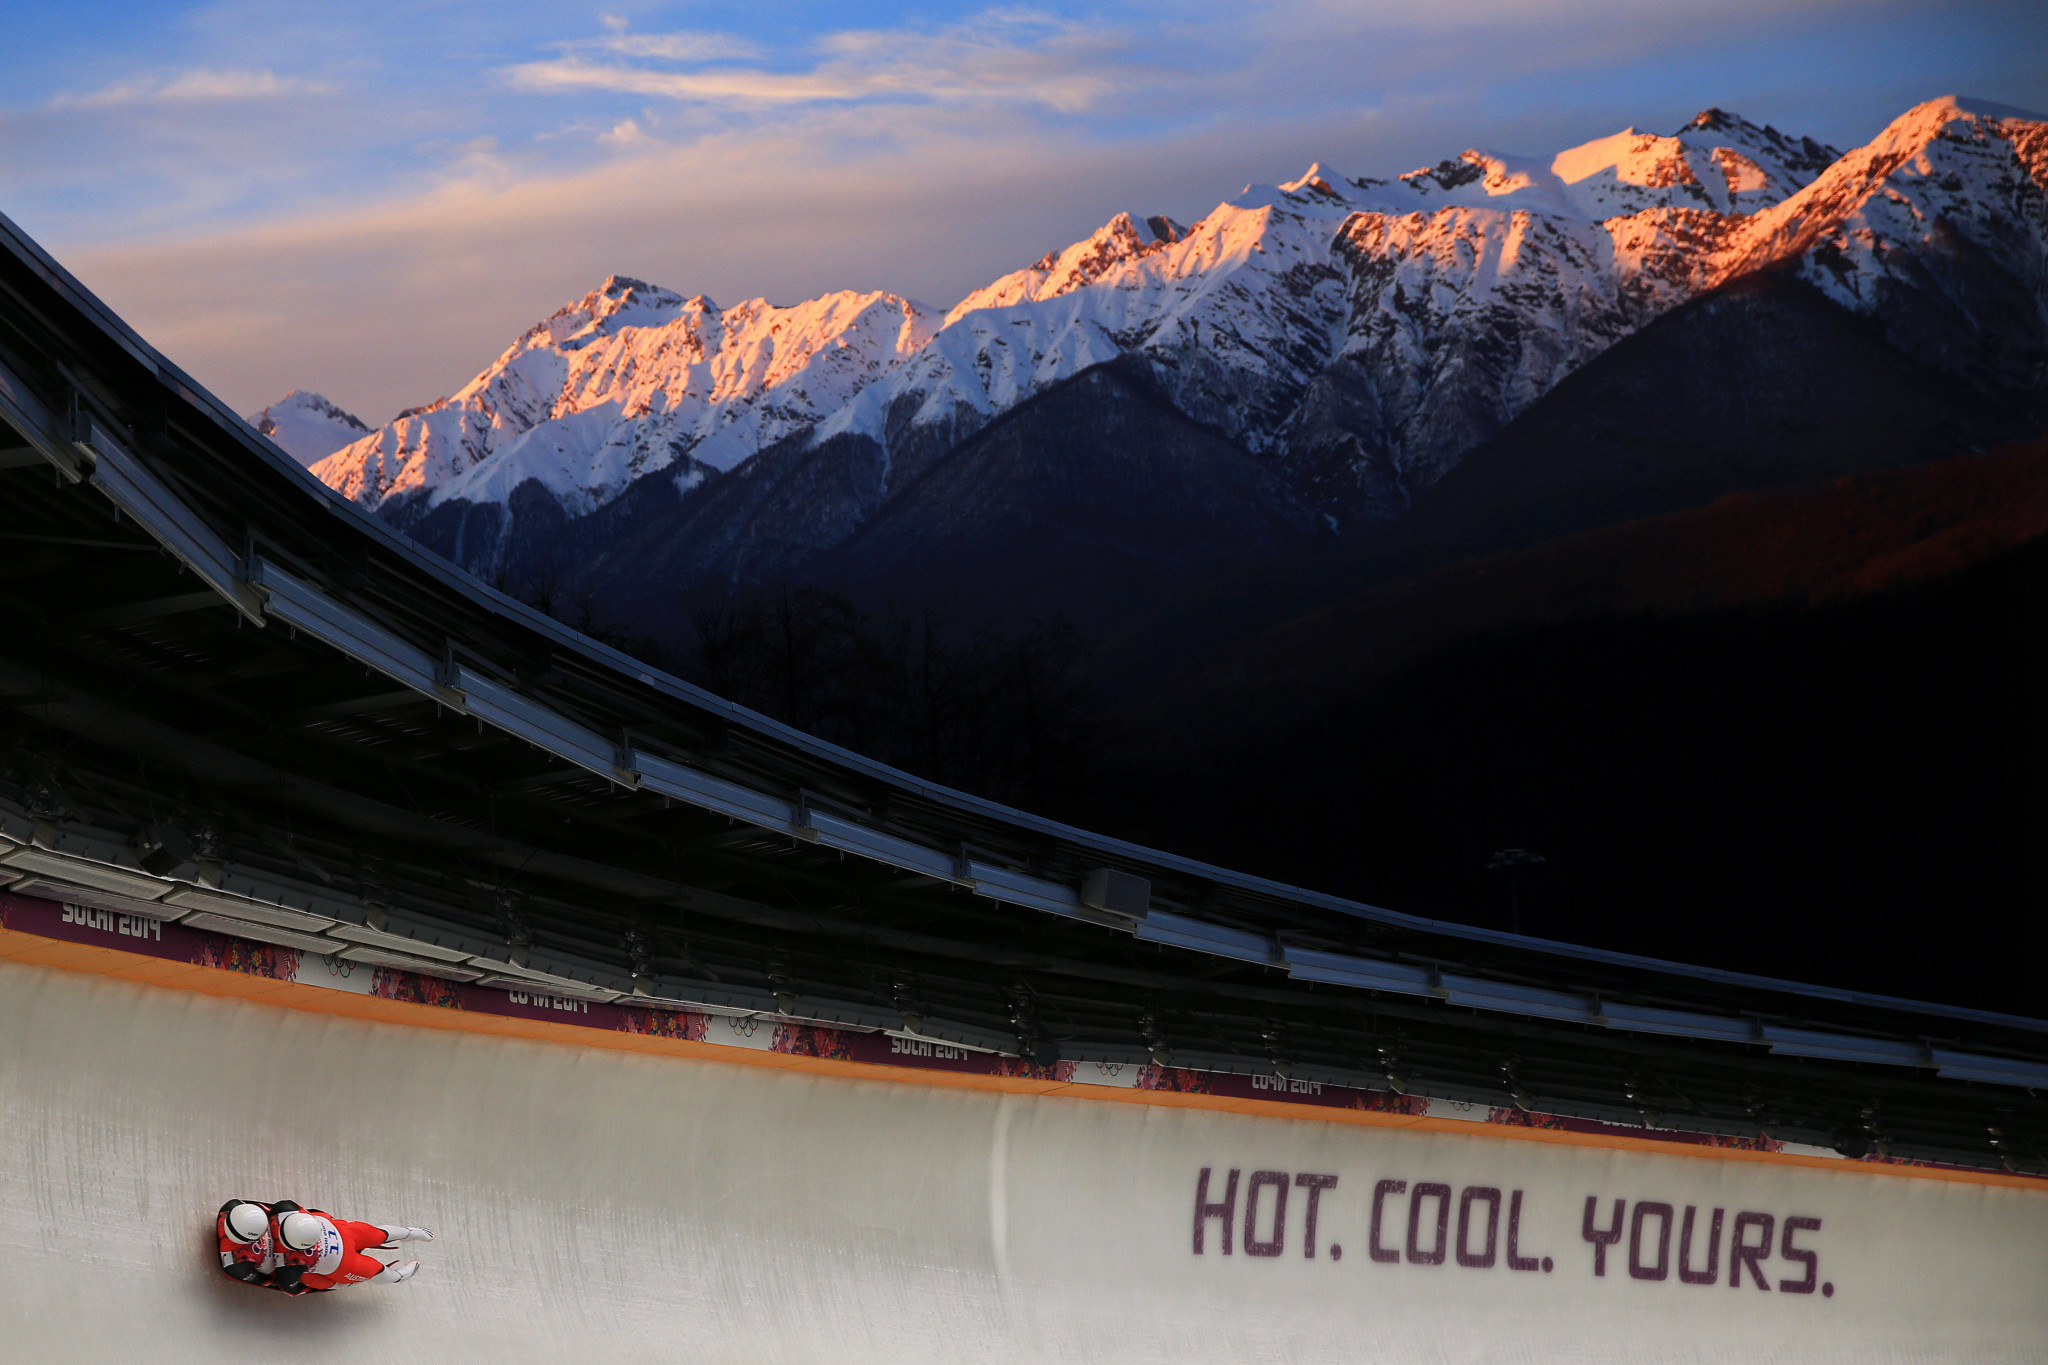 Luge: Dominik Fischnaller of Italy makes a run during the Men's Singles on Day 1 of the Sochi 2014 Winter Olympics. 2050x1370 HD Wallpaper.